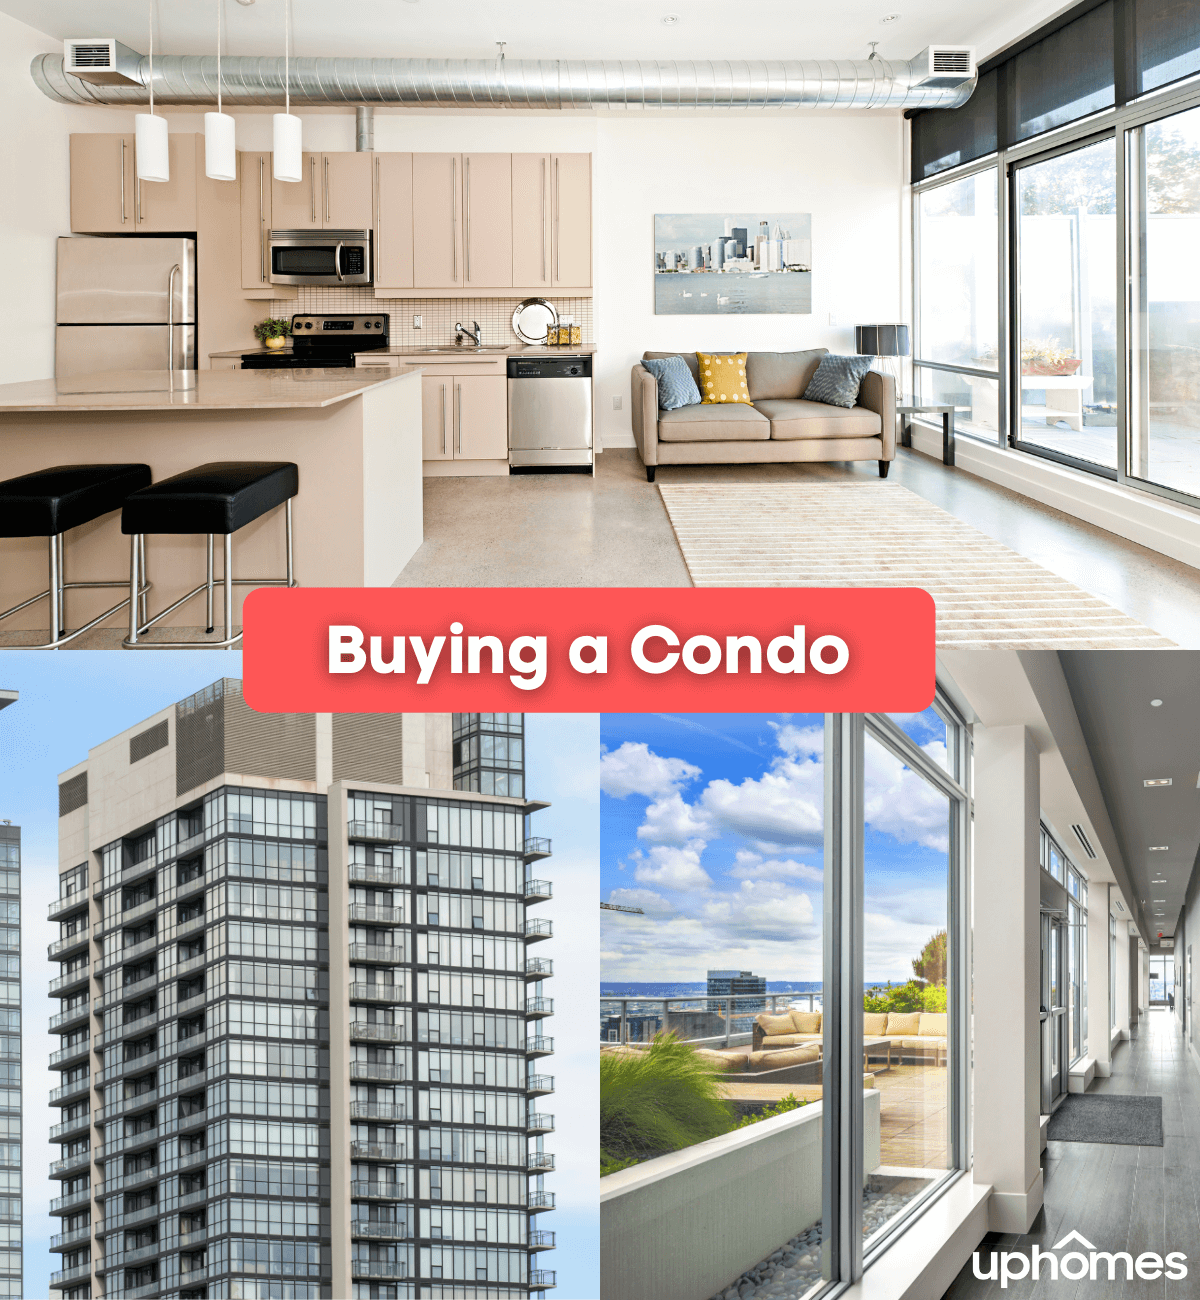 7 Tips Before you buy a condo - Buying a condominium unit is much different from purchasing a single family home